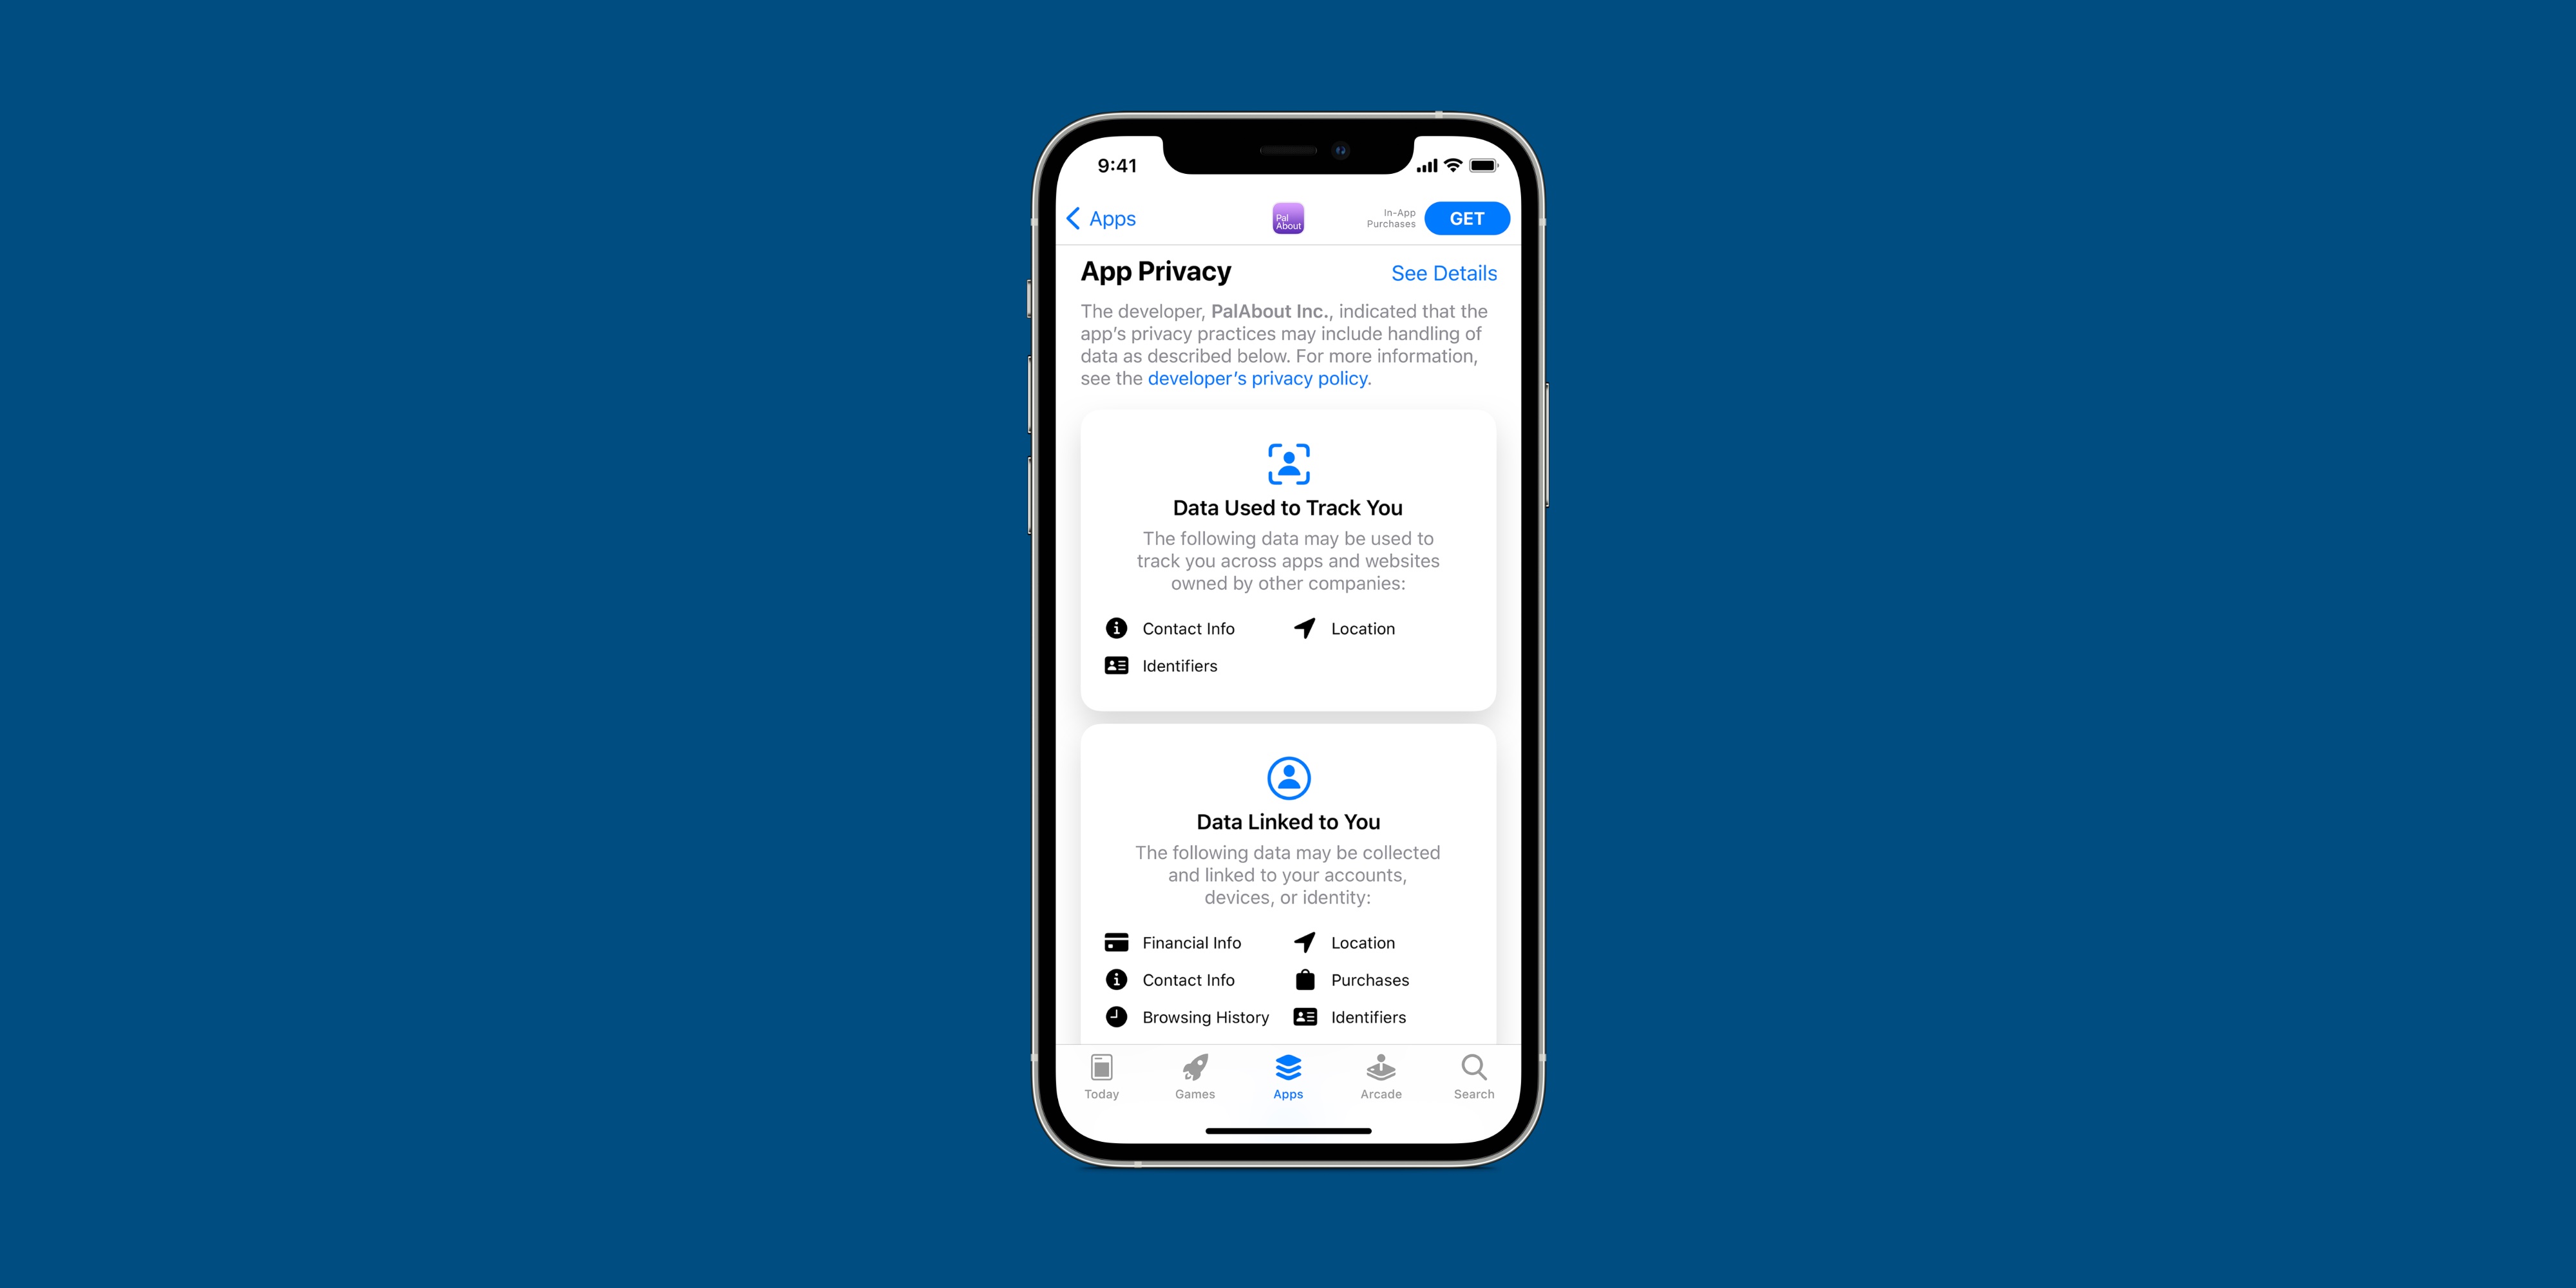 Is the app privacy worth paying attention to in the App Store